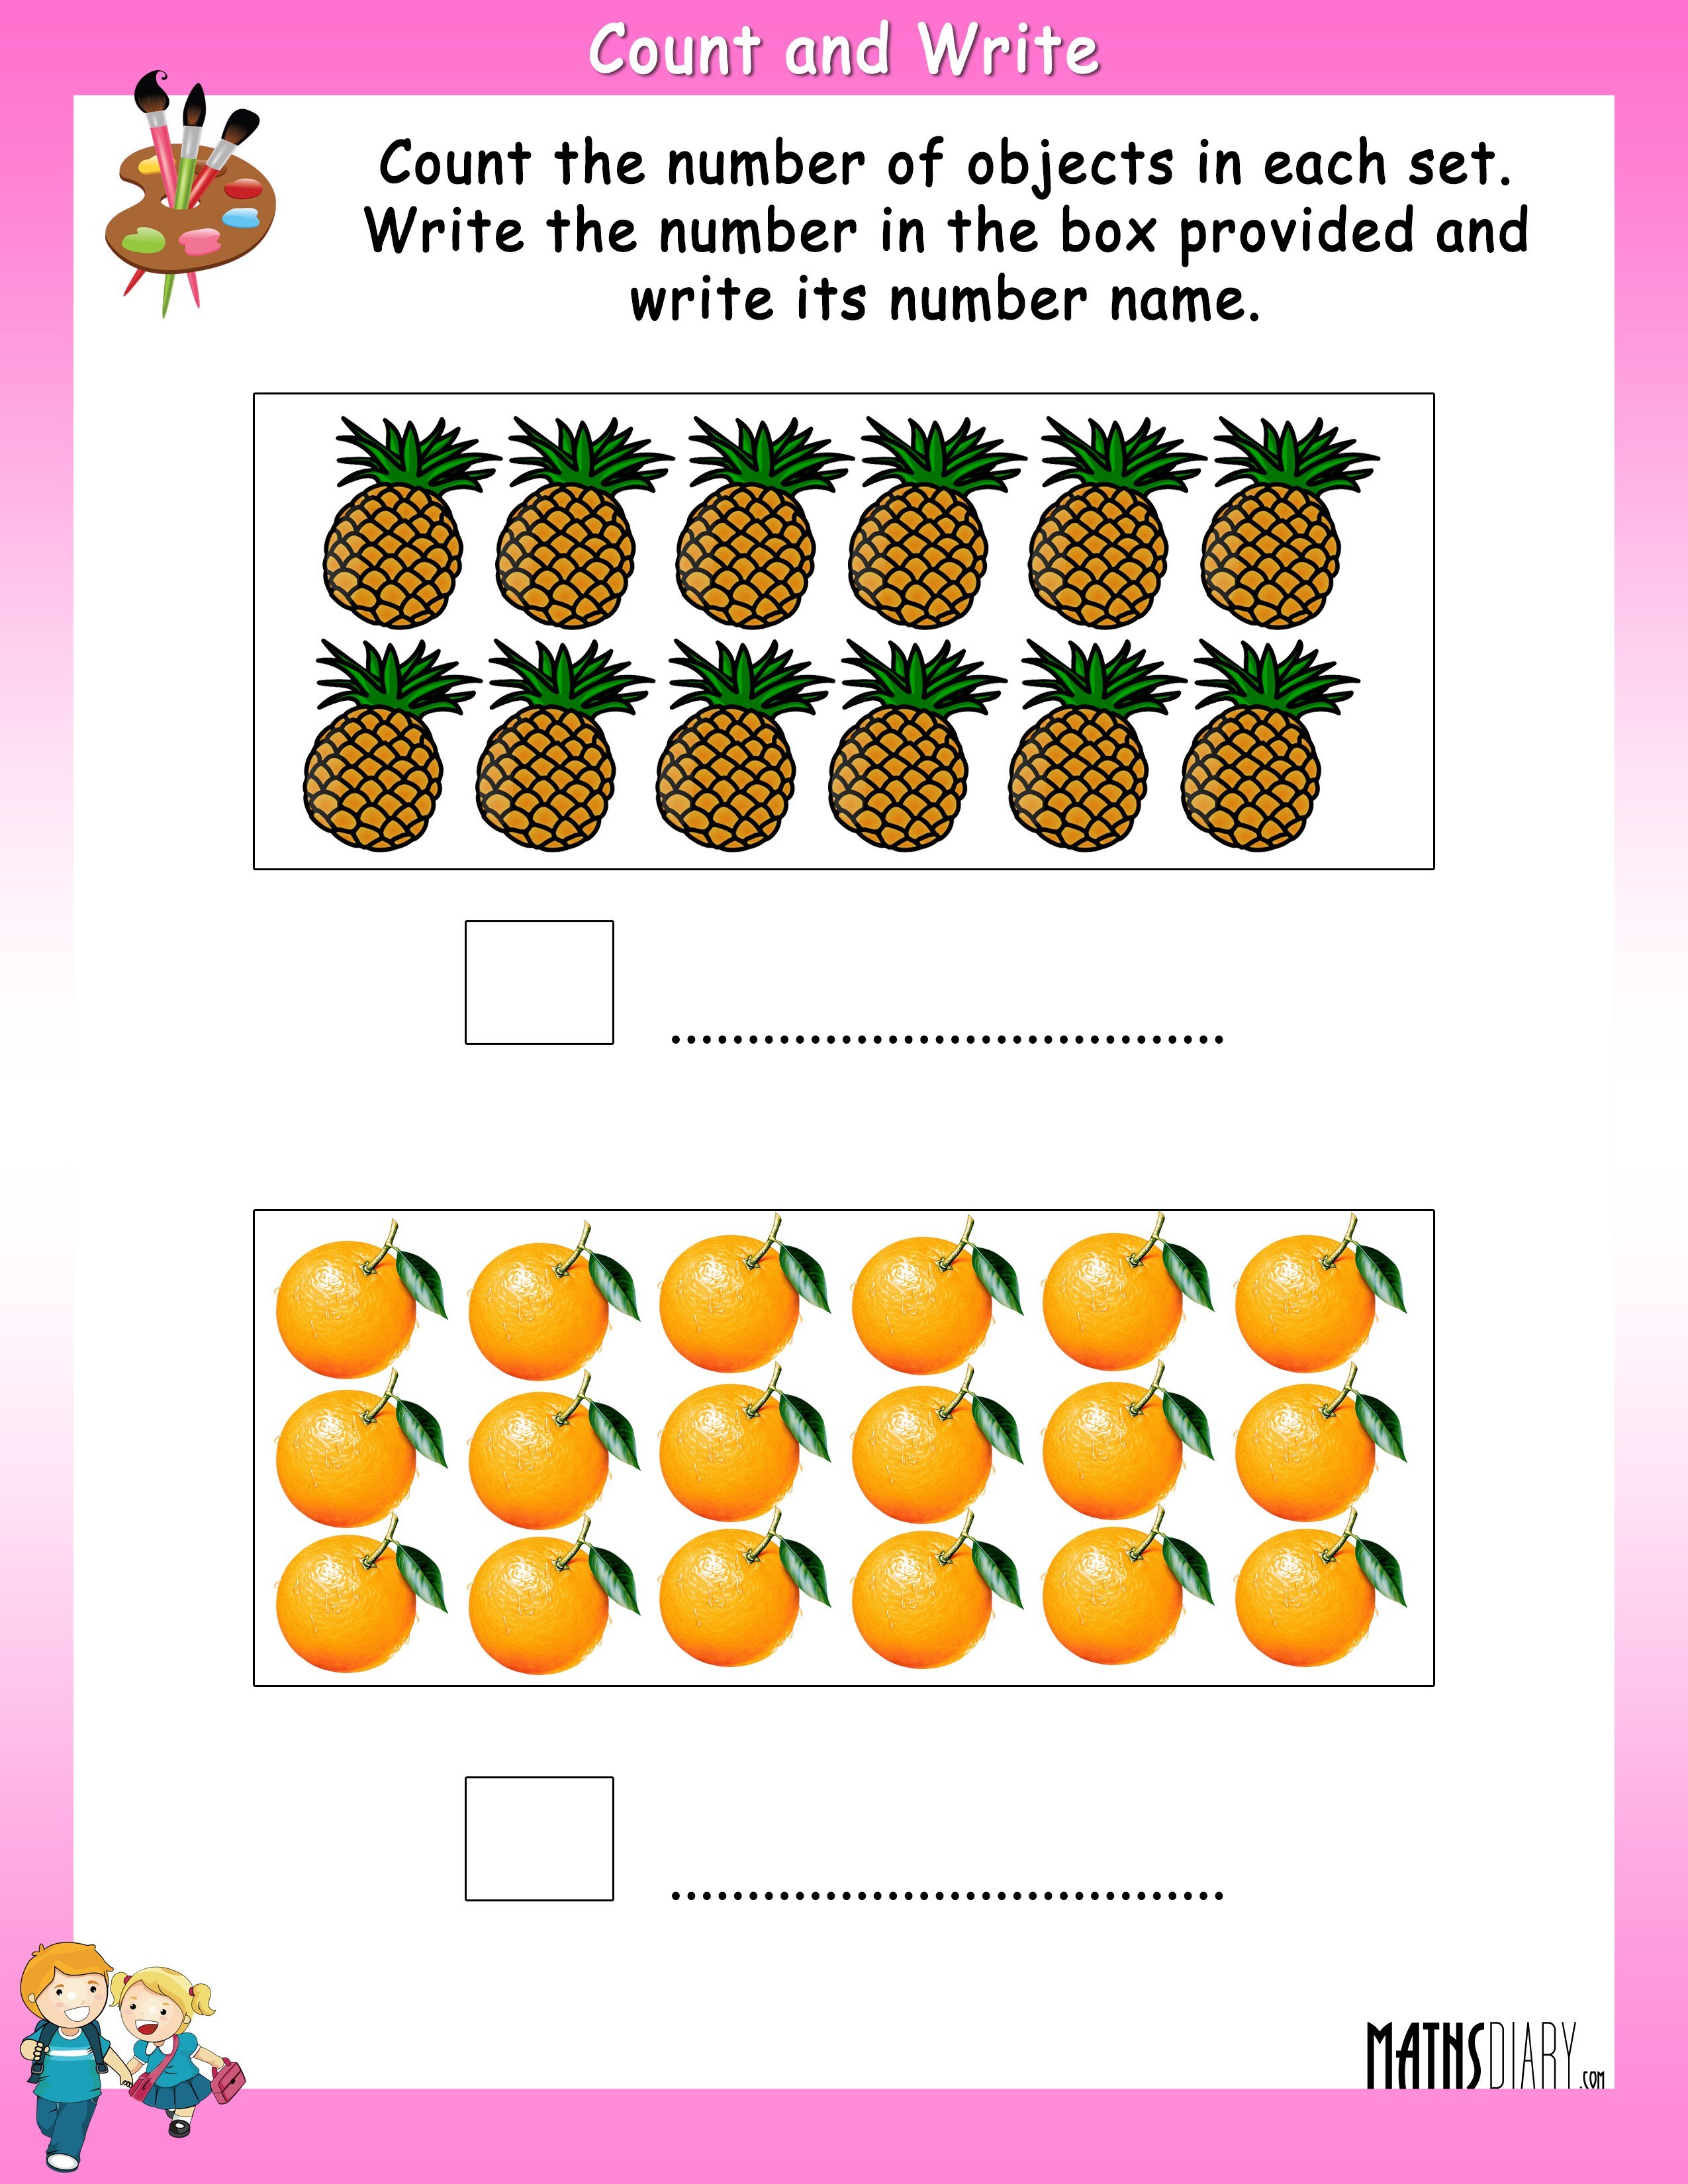 counting-worksheet-counting-back-in-1s-to-20-1-kindergarten-counting-worksheets-1-20